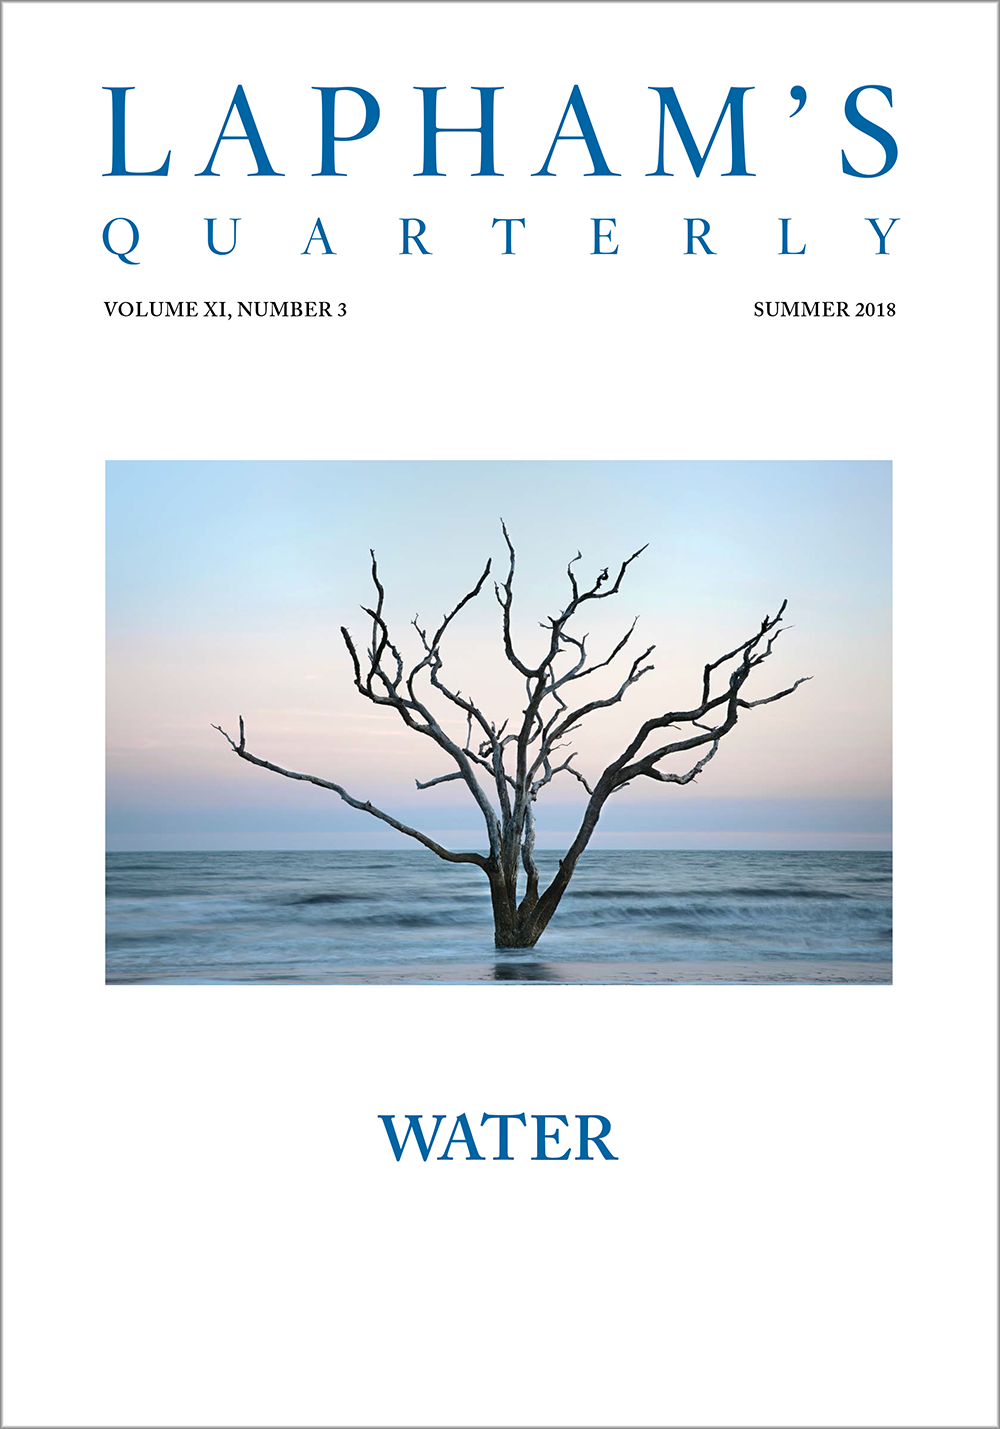 Water, the Summer 2018 issue of Lapham’s Quarterly.